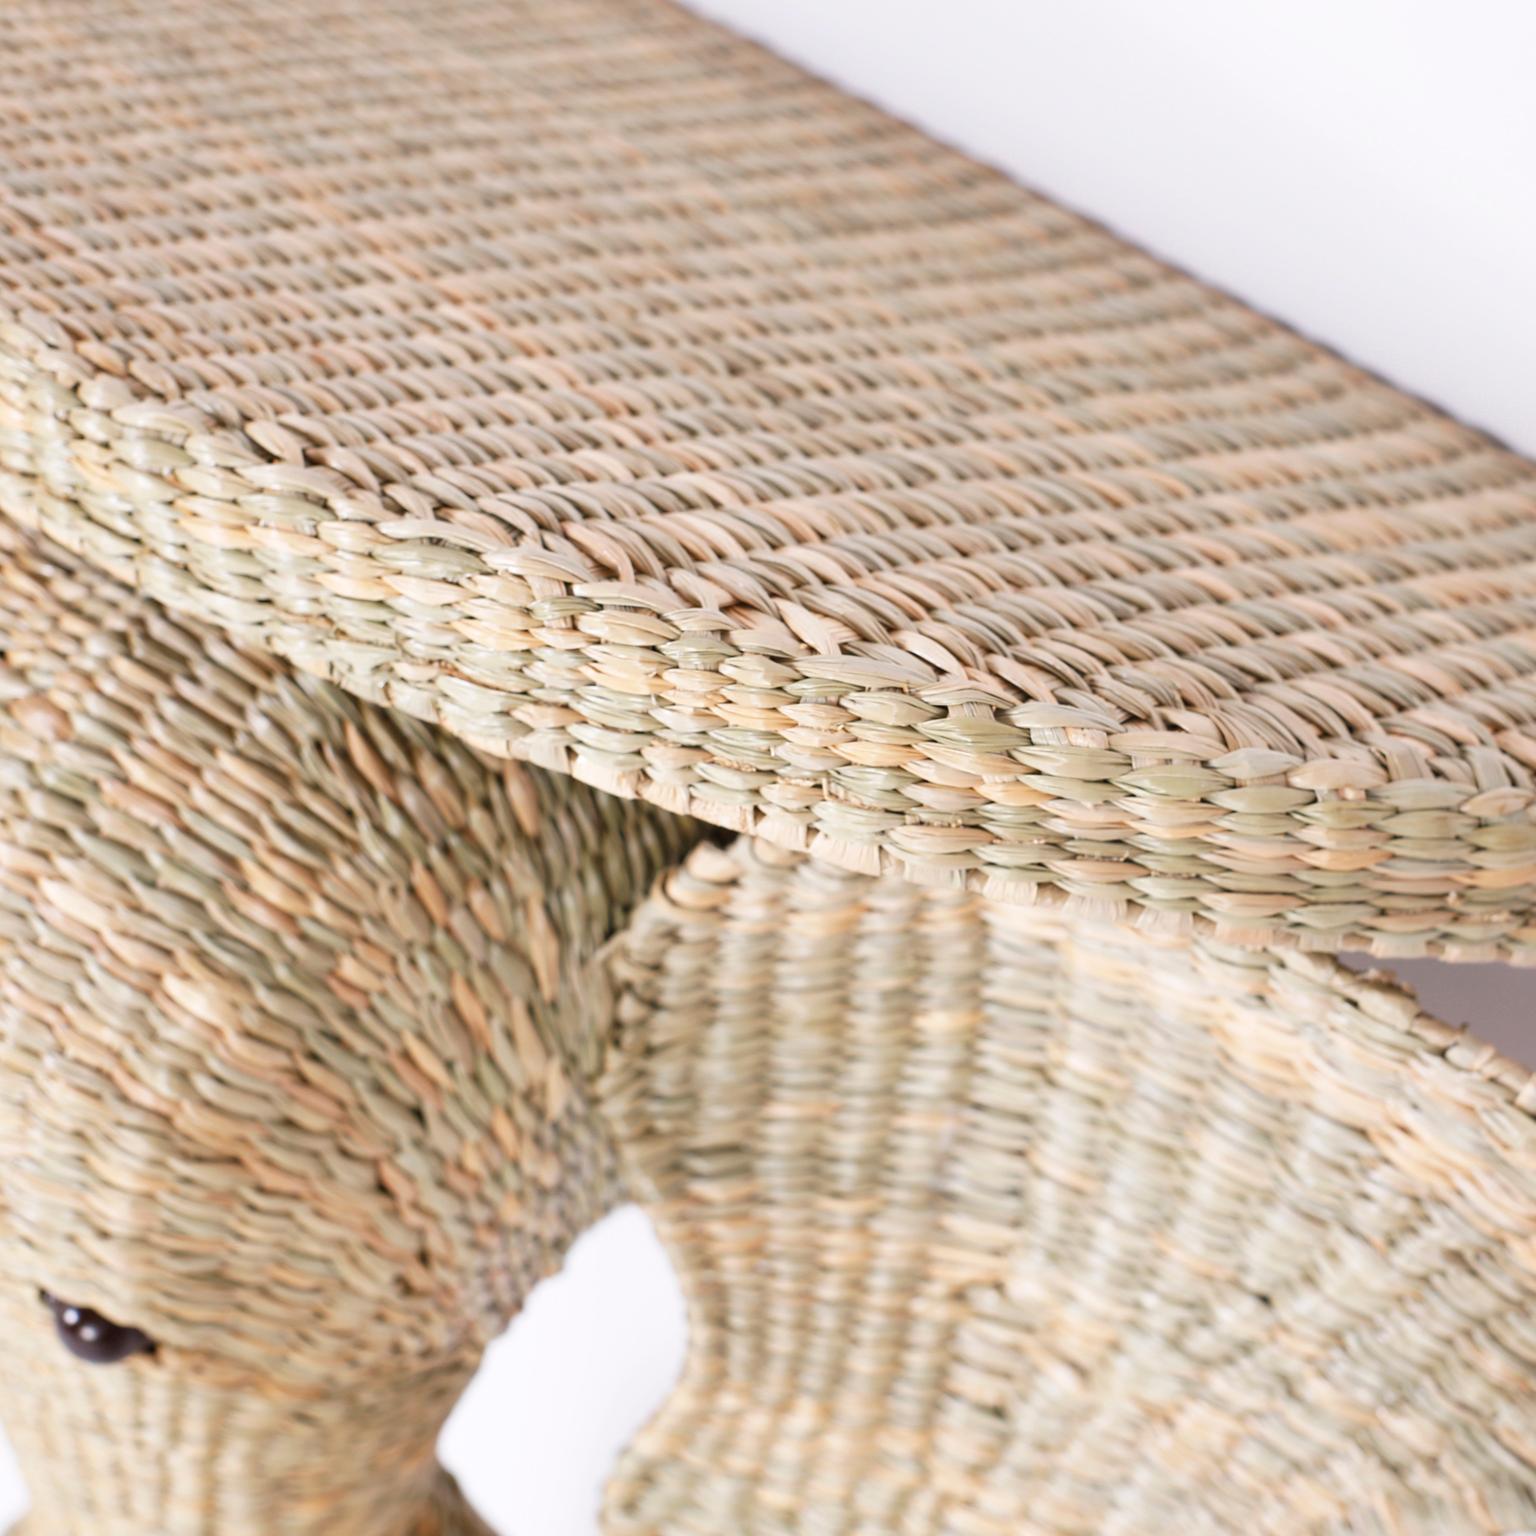 Hand-Woven Pair of Wicker Elephant Consoles or Brackets from the FS Flores Collection